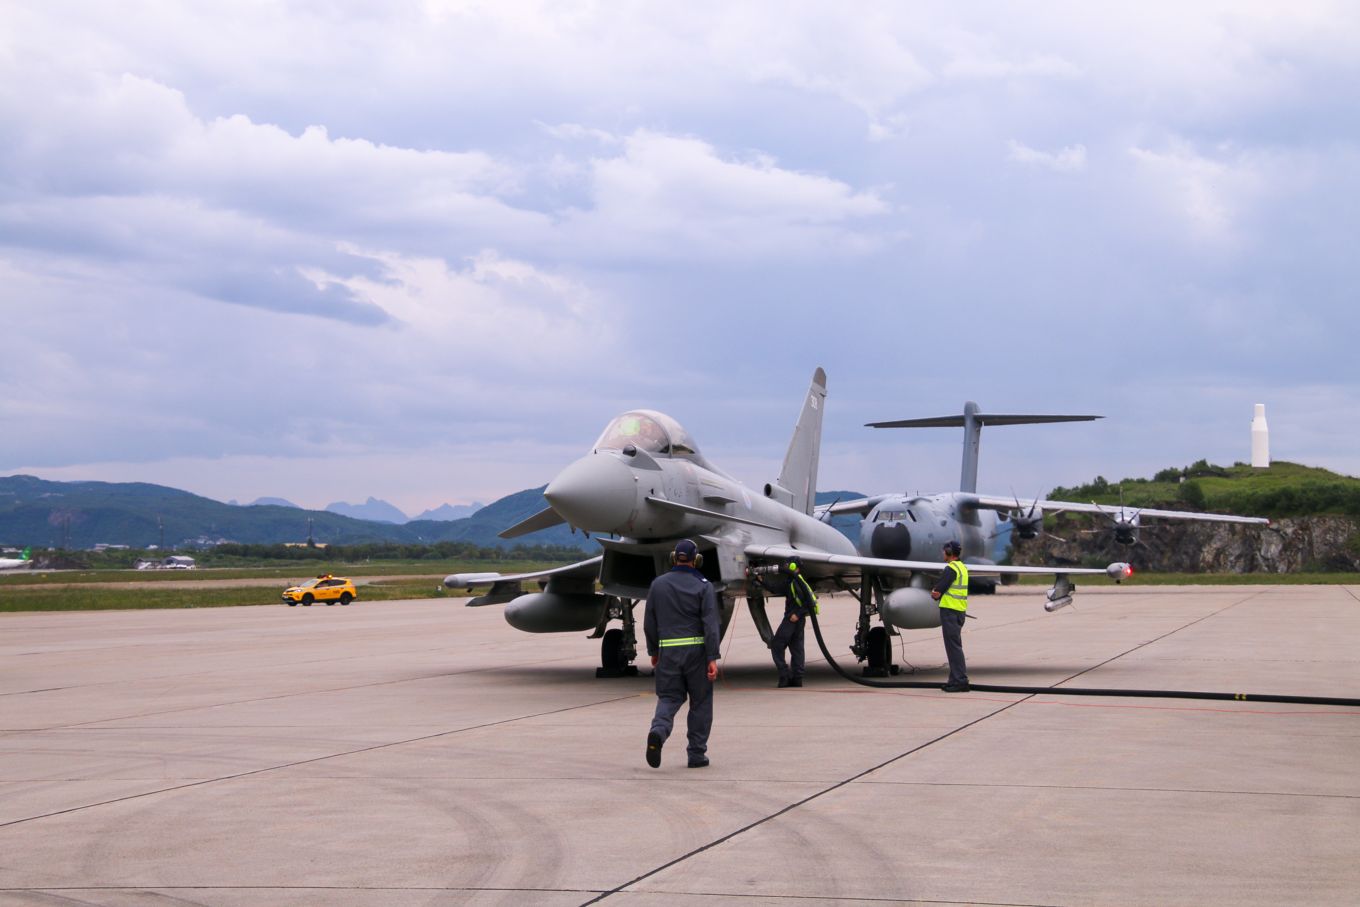 Typhoon aircraft being refuelled on the ground and A400M Atlas in the background.